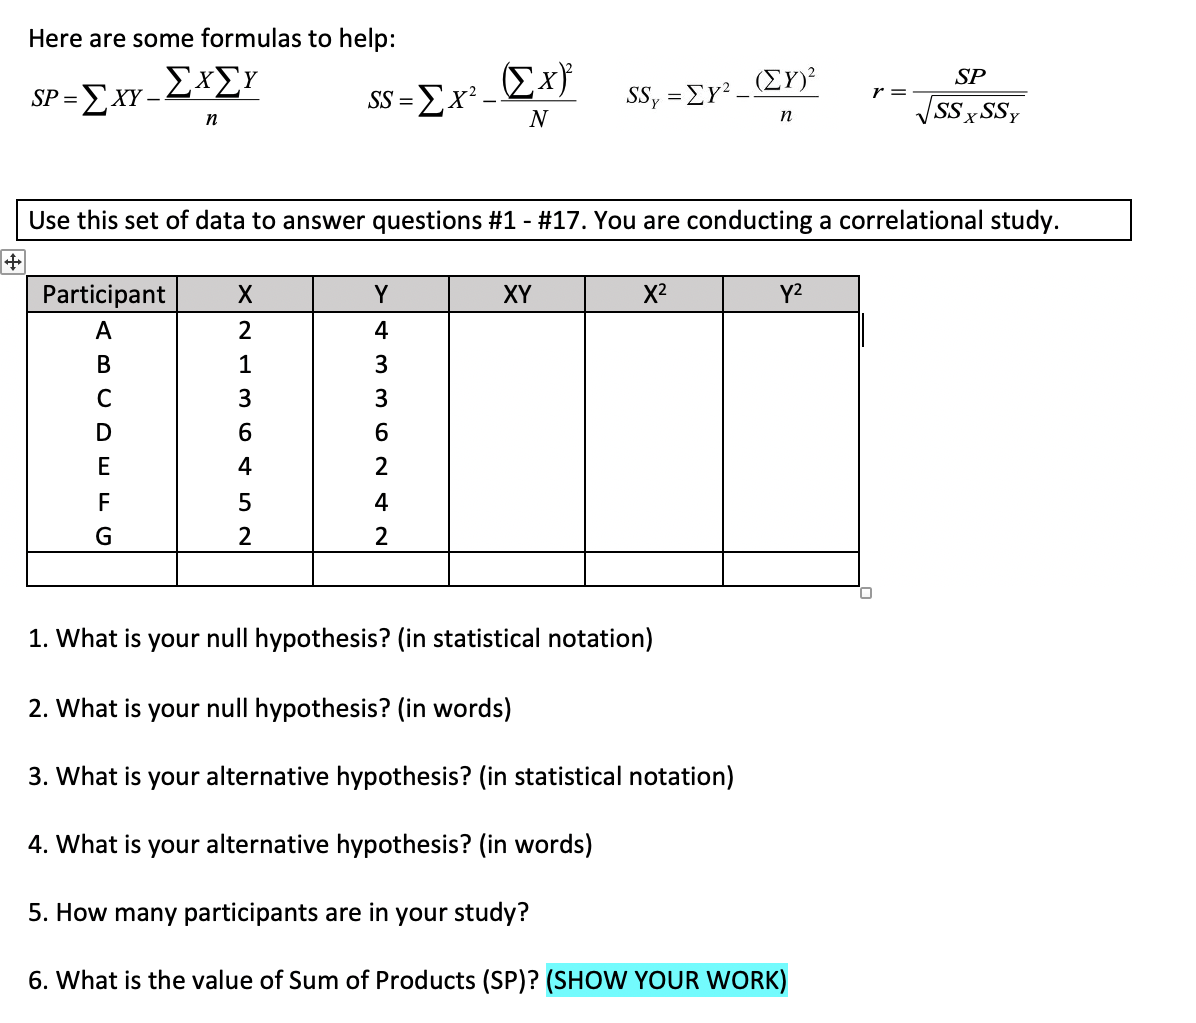 Here are some formulas to help:
Σx
(ΣΥ
SP
SP =ExY -LXEY
SS =Ex² -
N
SS, =EY².
SS×SSY
n
n
Use this set of data to answer questions #1 - #17. You are conducting a correlational study.
Participant
Y
XY
X2
Y2
A
4
1
C
3.
3.
D
6
E
4
2
F
4
G
2
2
1. What is your null hypothesis? (in statistical notation)
2. What is your null hypothesis? (in words)
3. What is your alternative hypothesis? (in statistical notation)
4. What is your alternative hypothesis? (in words)
5. How many participants are in your study?
6. What is the value of Sum of Products (SP)? (SHOW YOUR WORK)
